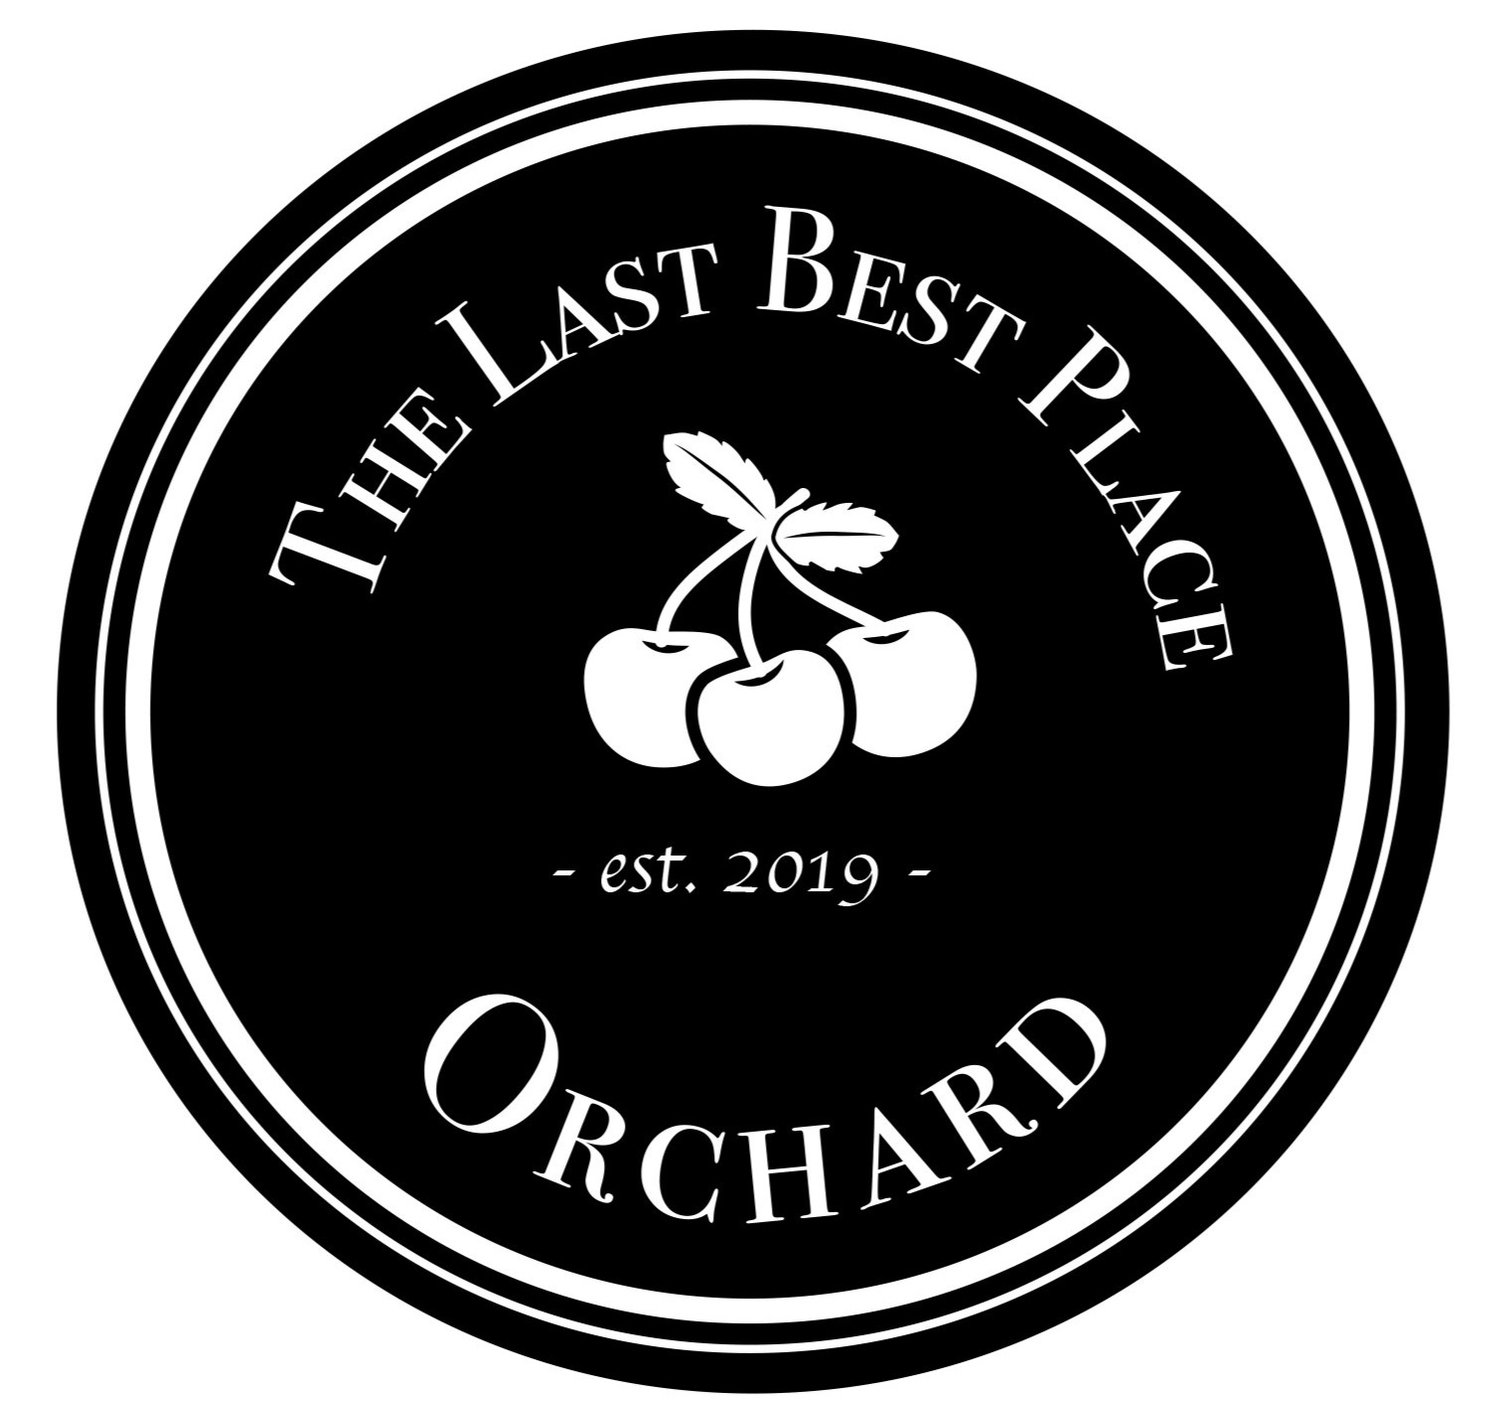 The Last Best Place Orchard